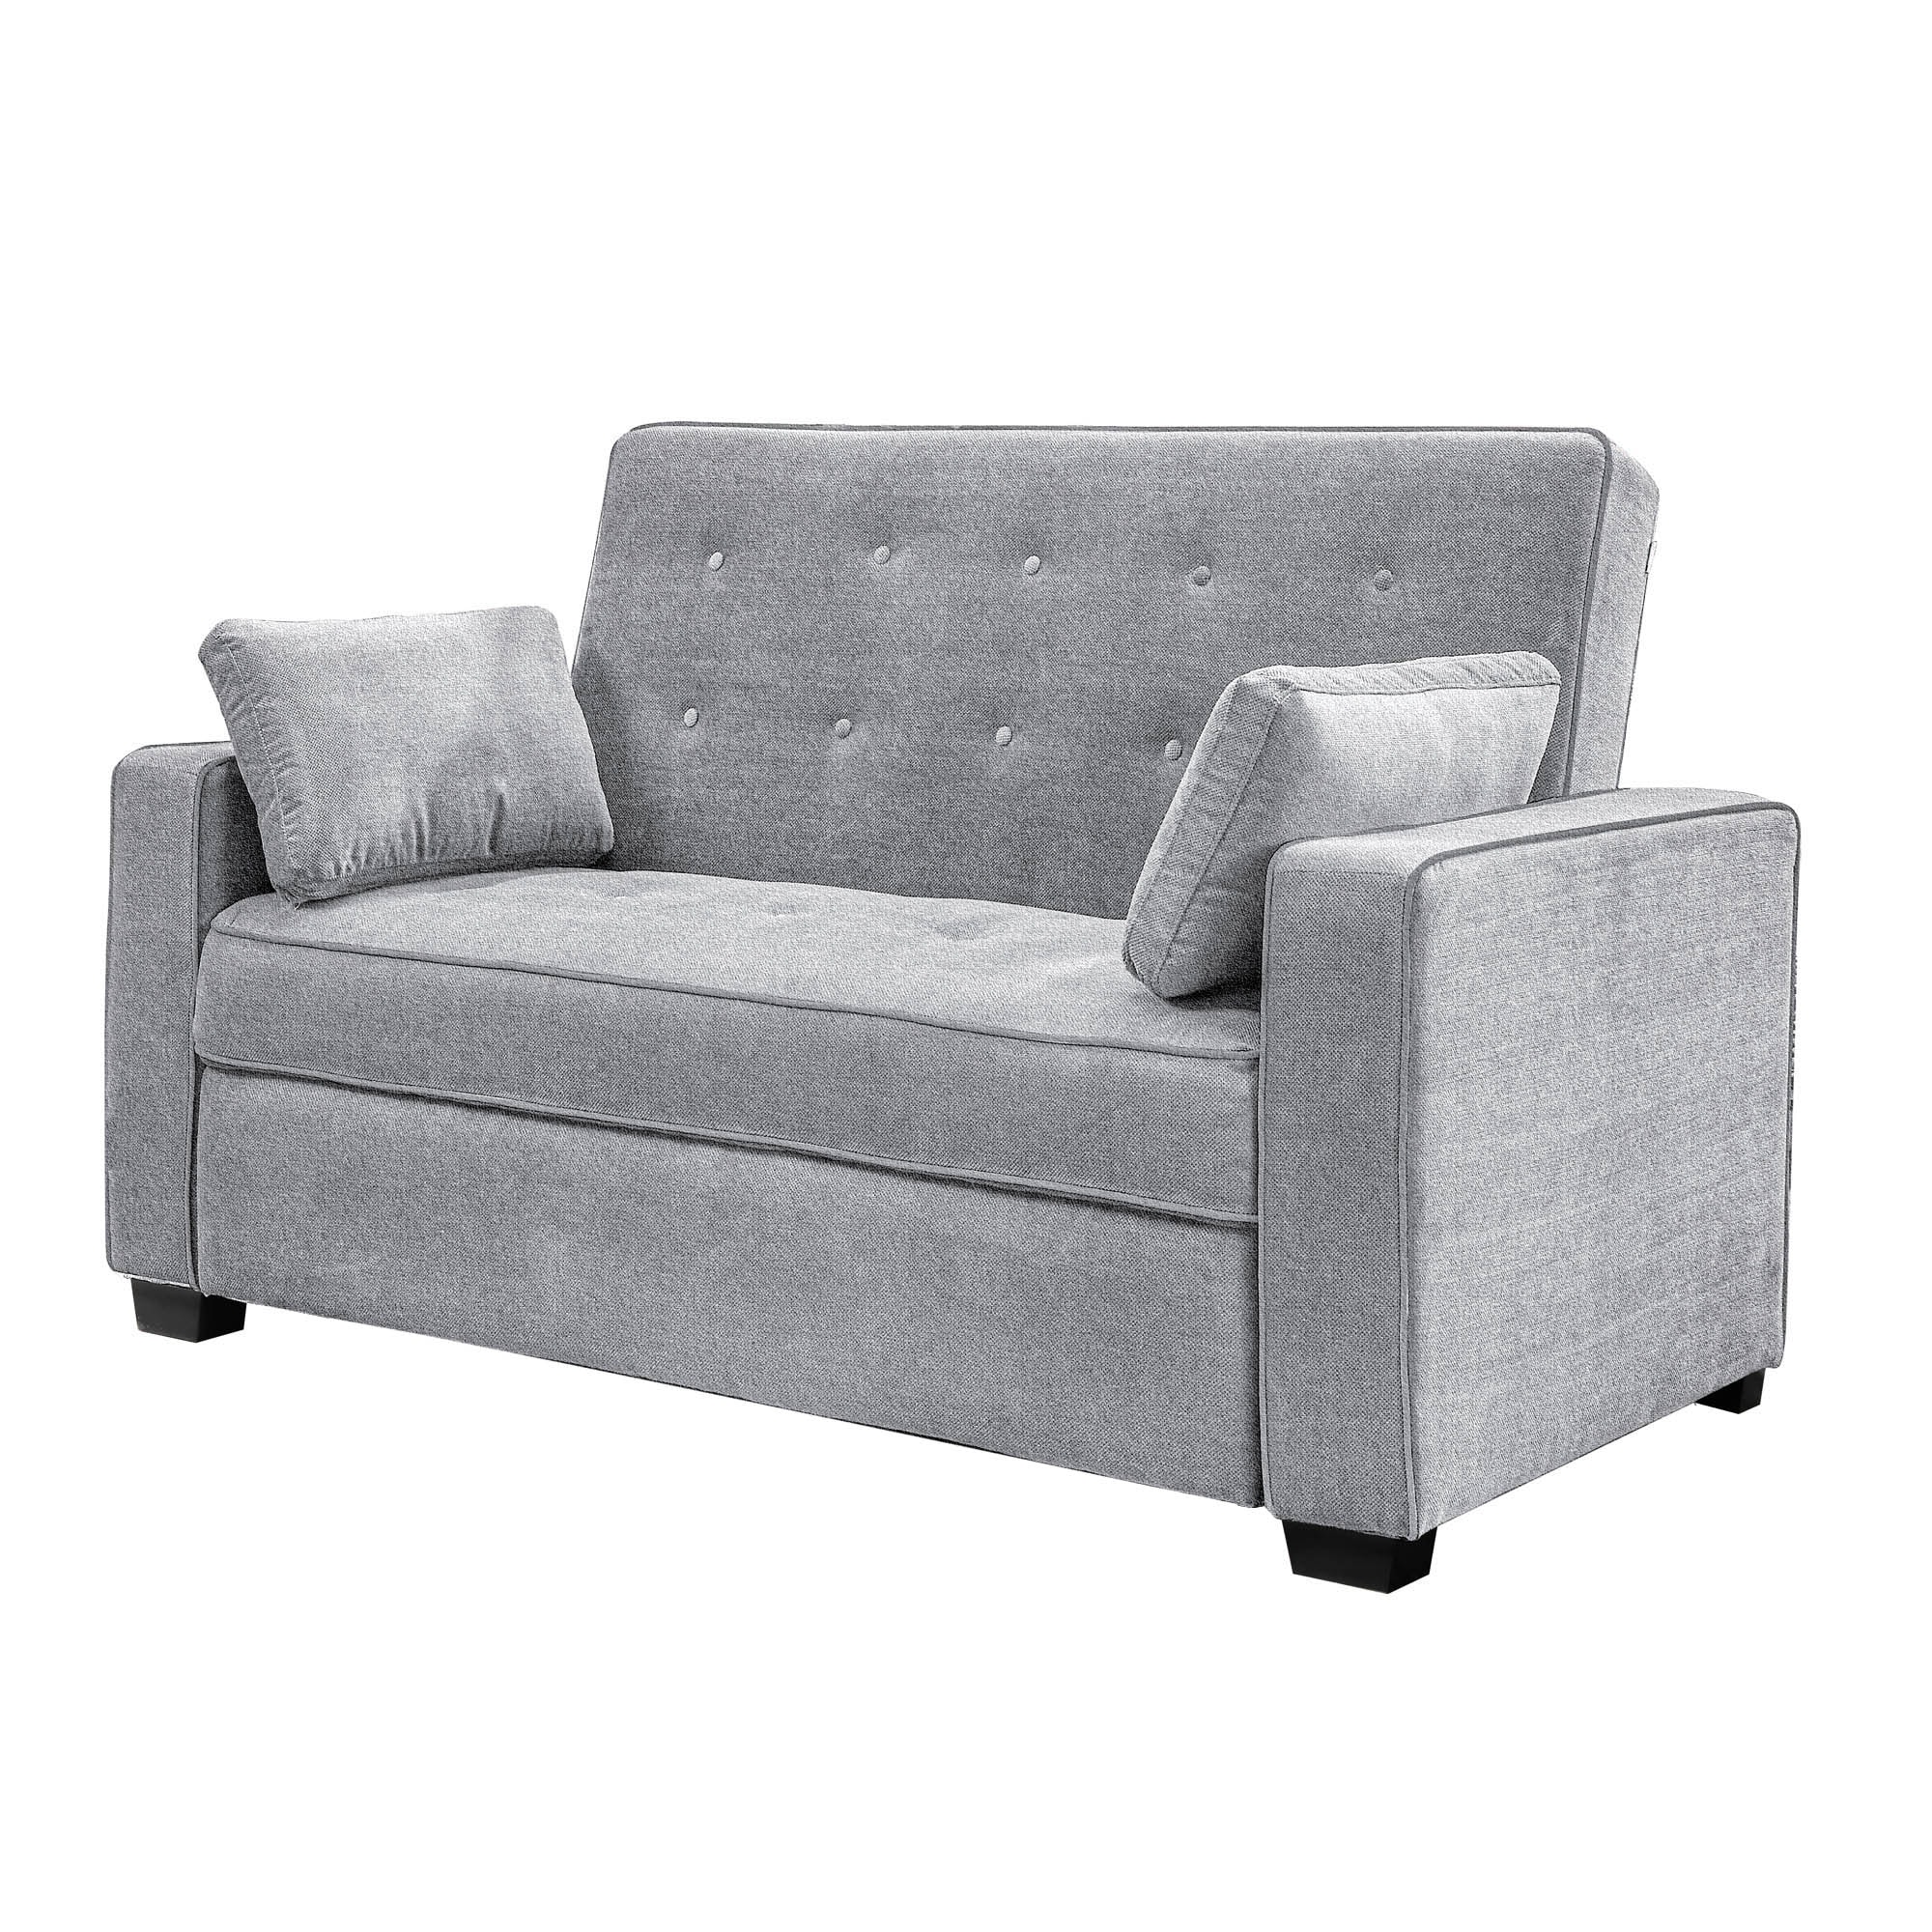 Serta Arya 66.5-in Modern the Sofa at & department in Couches, Grey 2-seater Light Sofas Loveseats Polyester/Blend